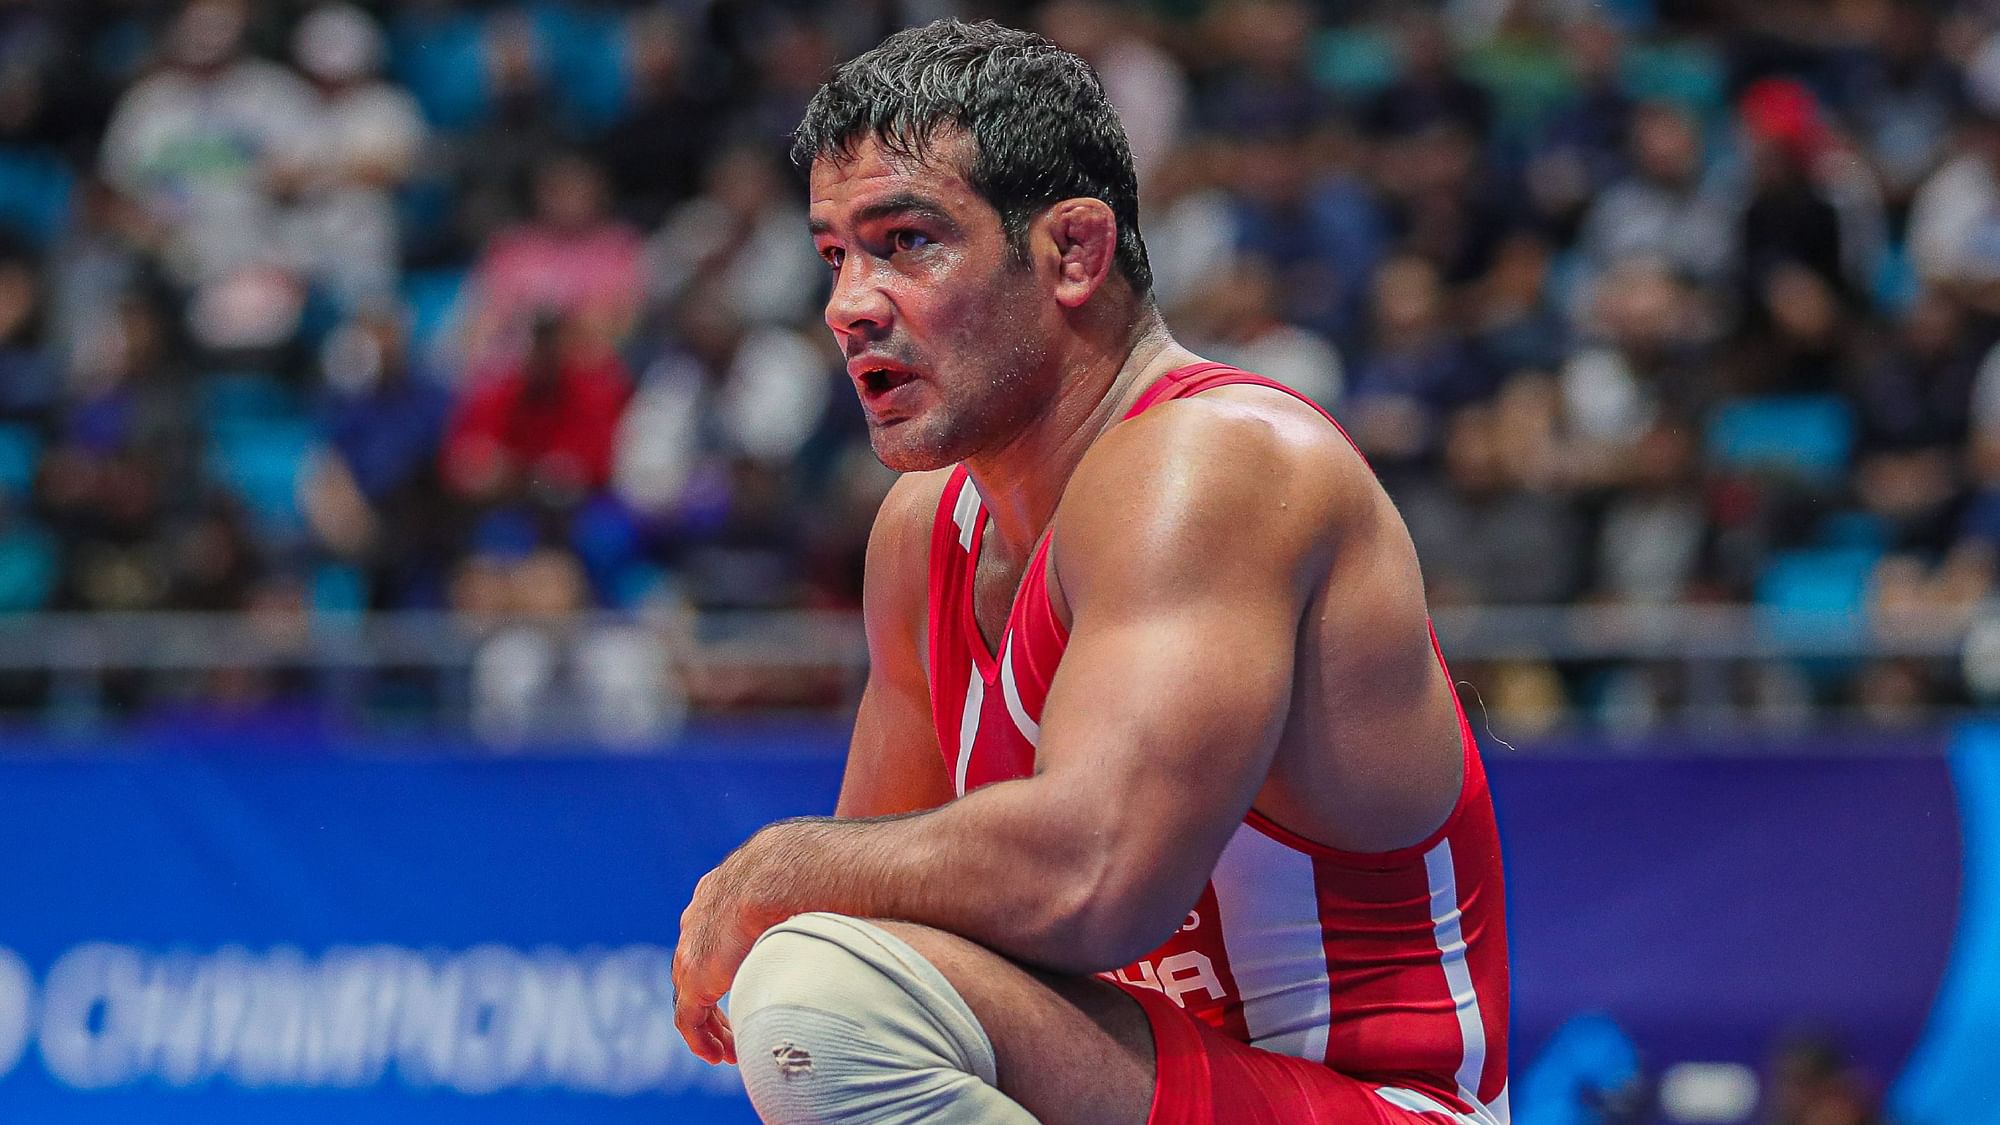 Sushil Kumar is aiming to qualify for the Tokyo Olympics but is yet to become India’s top contender in his category.